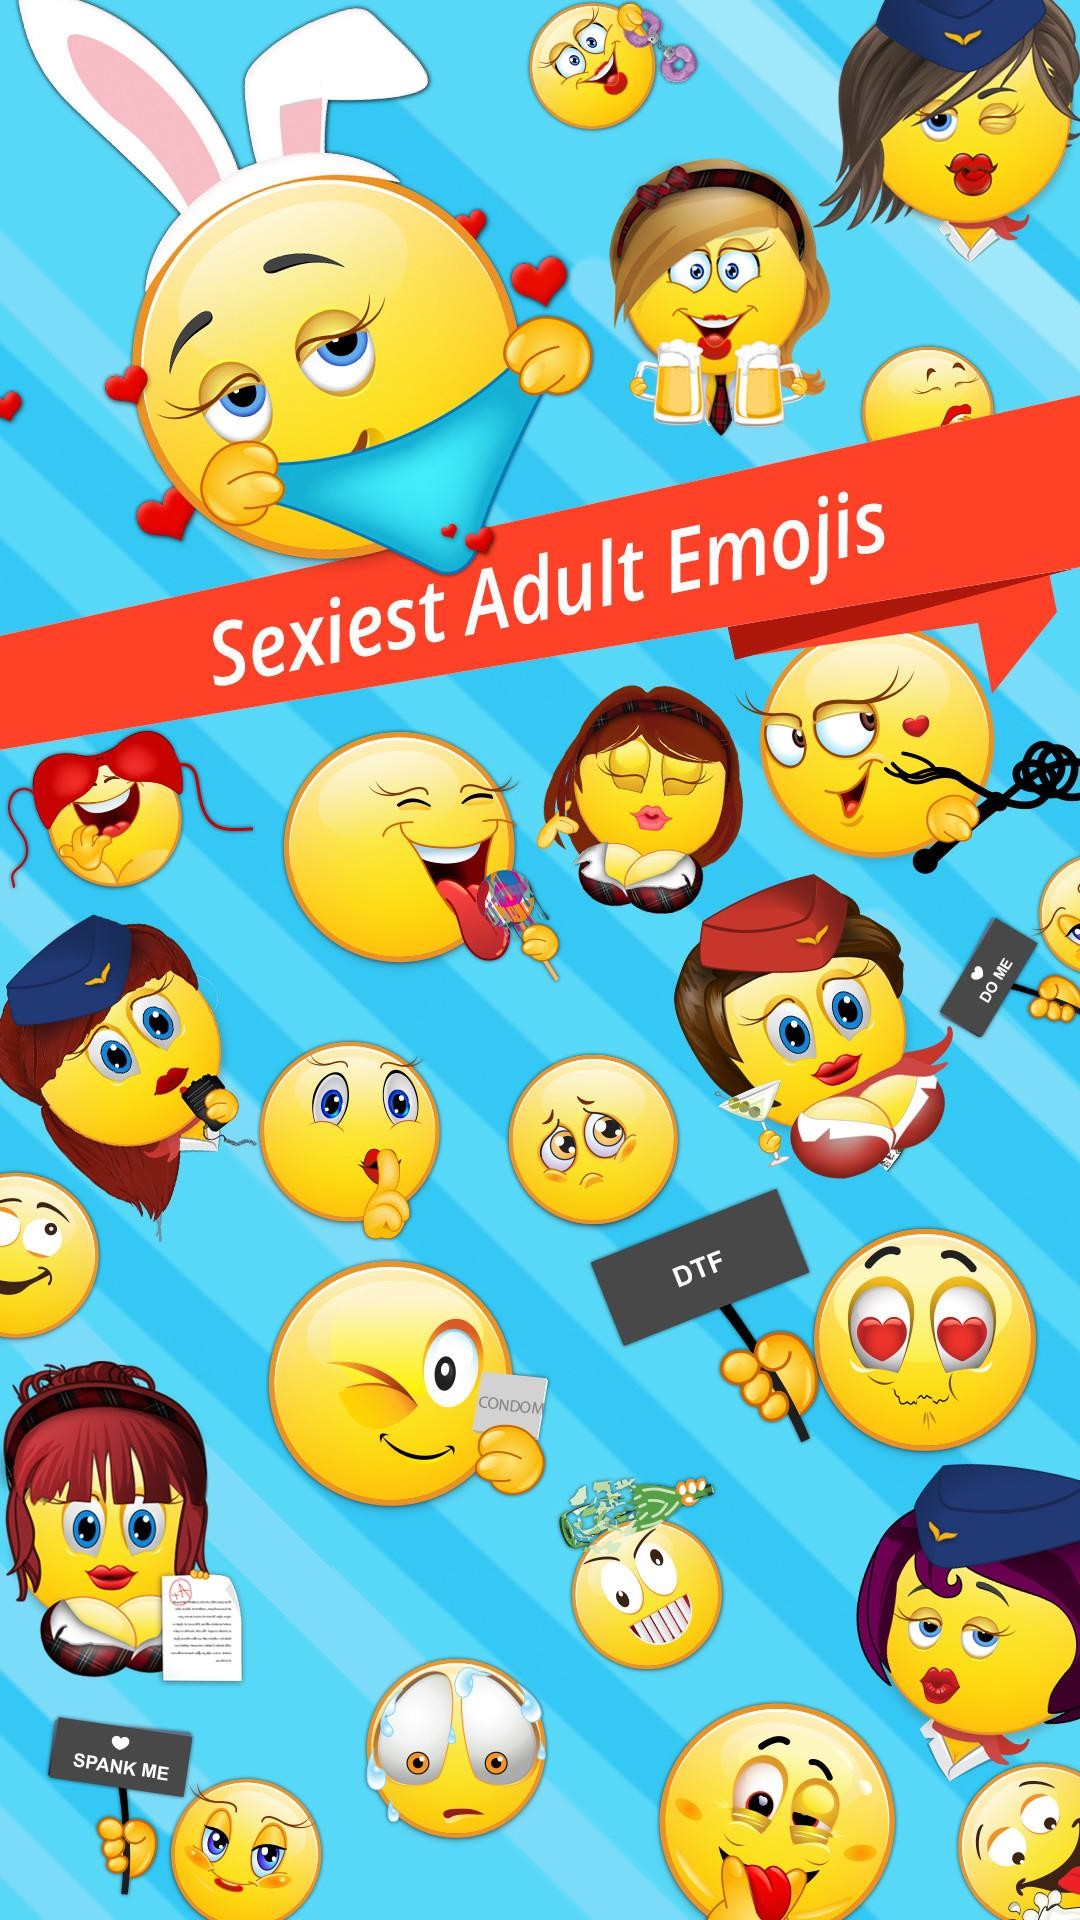 1080x1920 Funny Girly Iphone Emoji Pictures Wallpaper | www.picturesboss.com